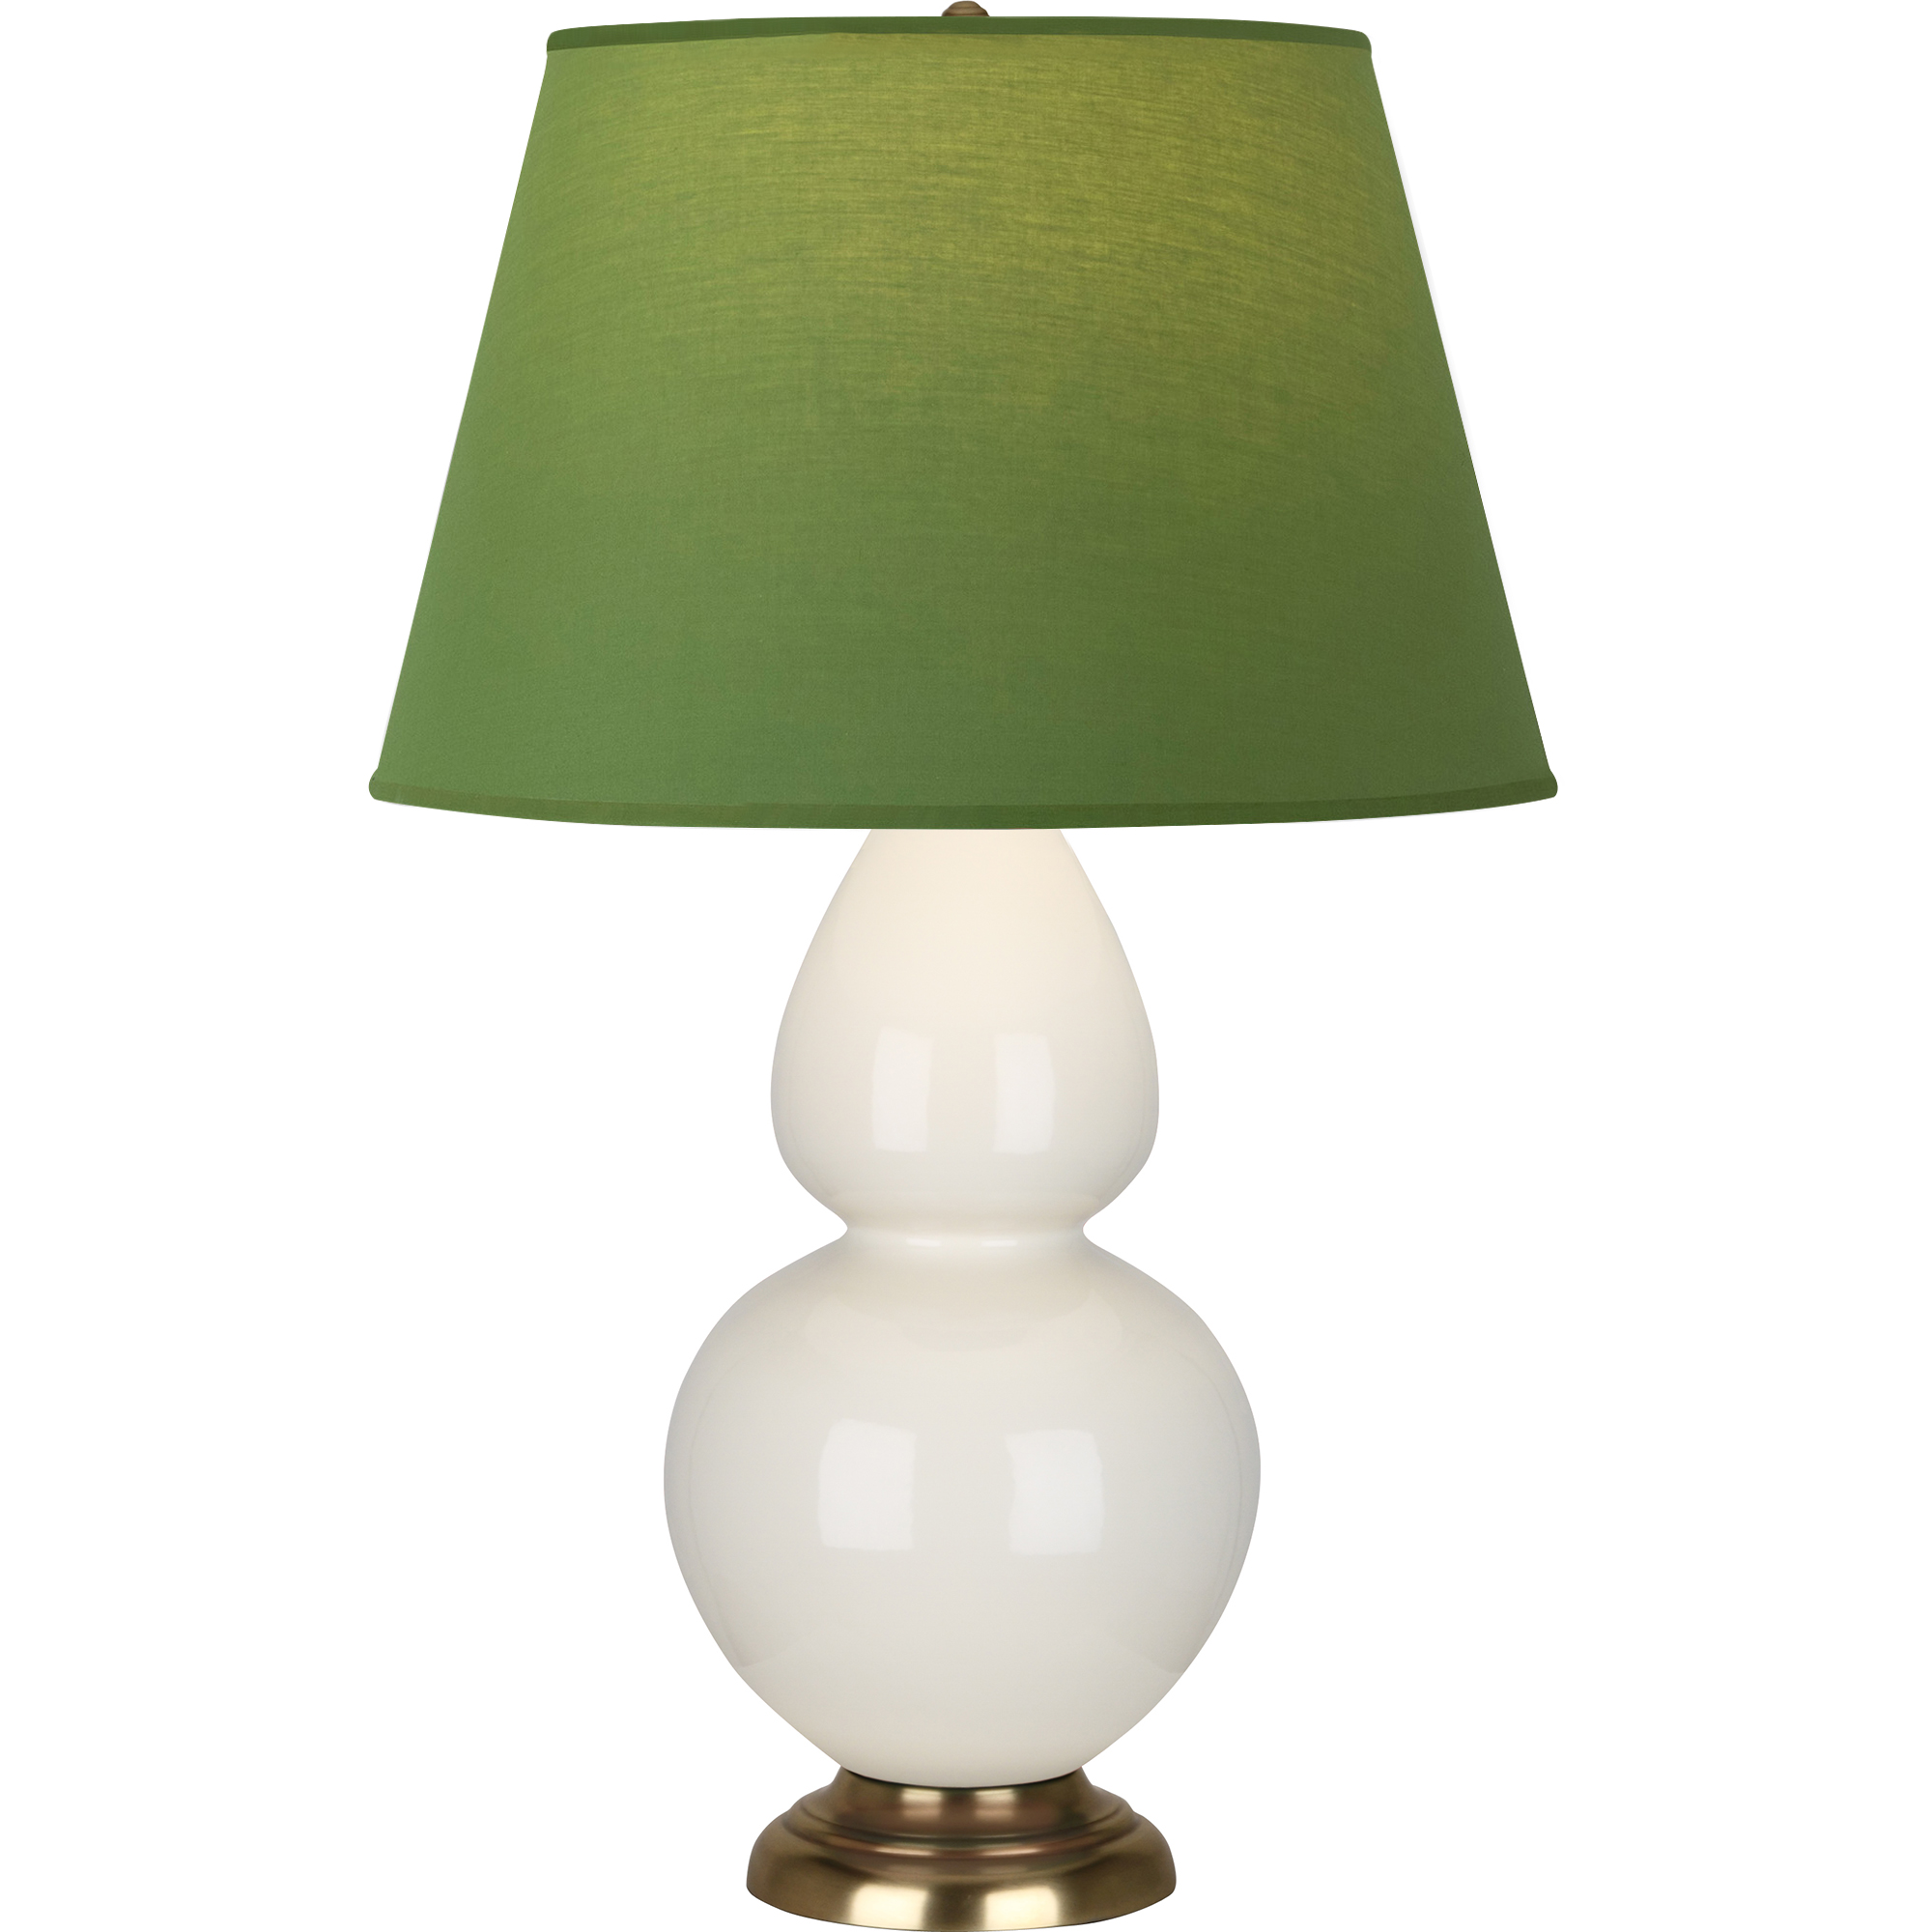 Double Gourd Table Lamp Style #1754G